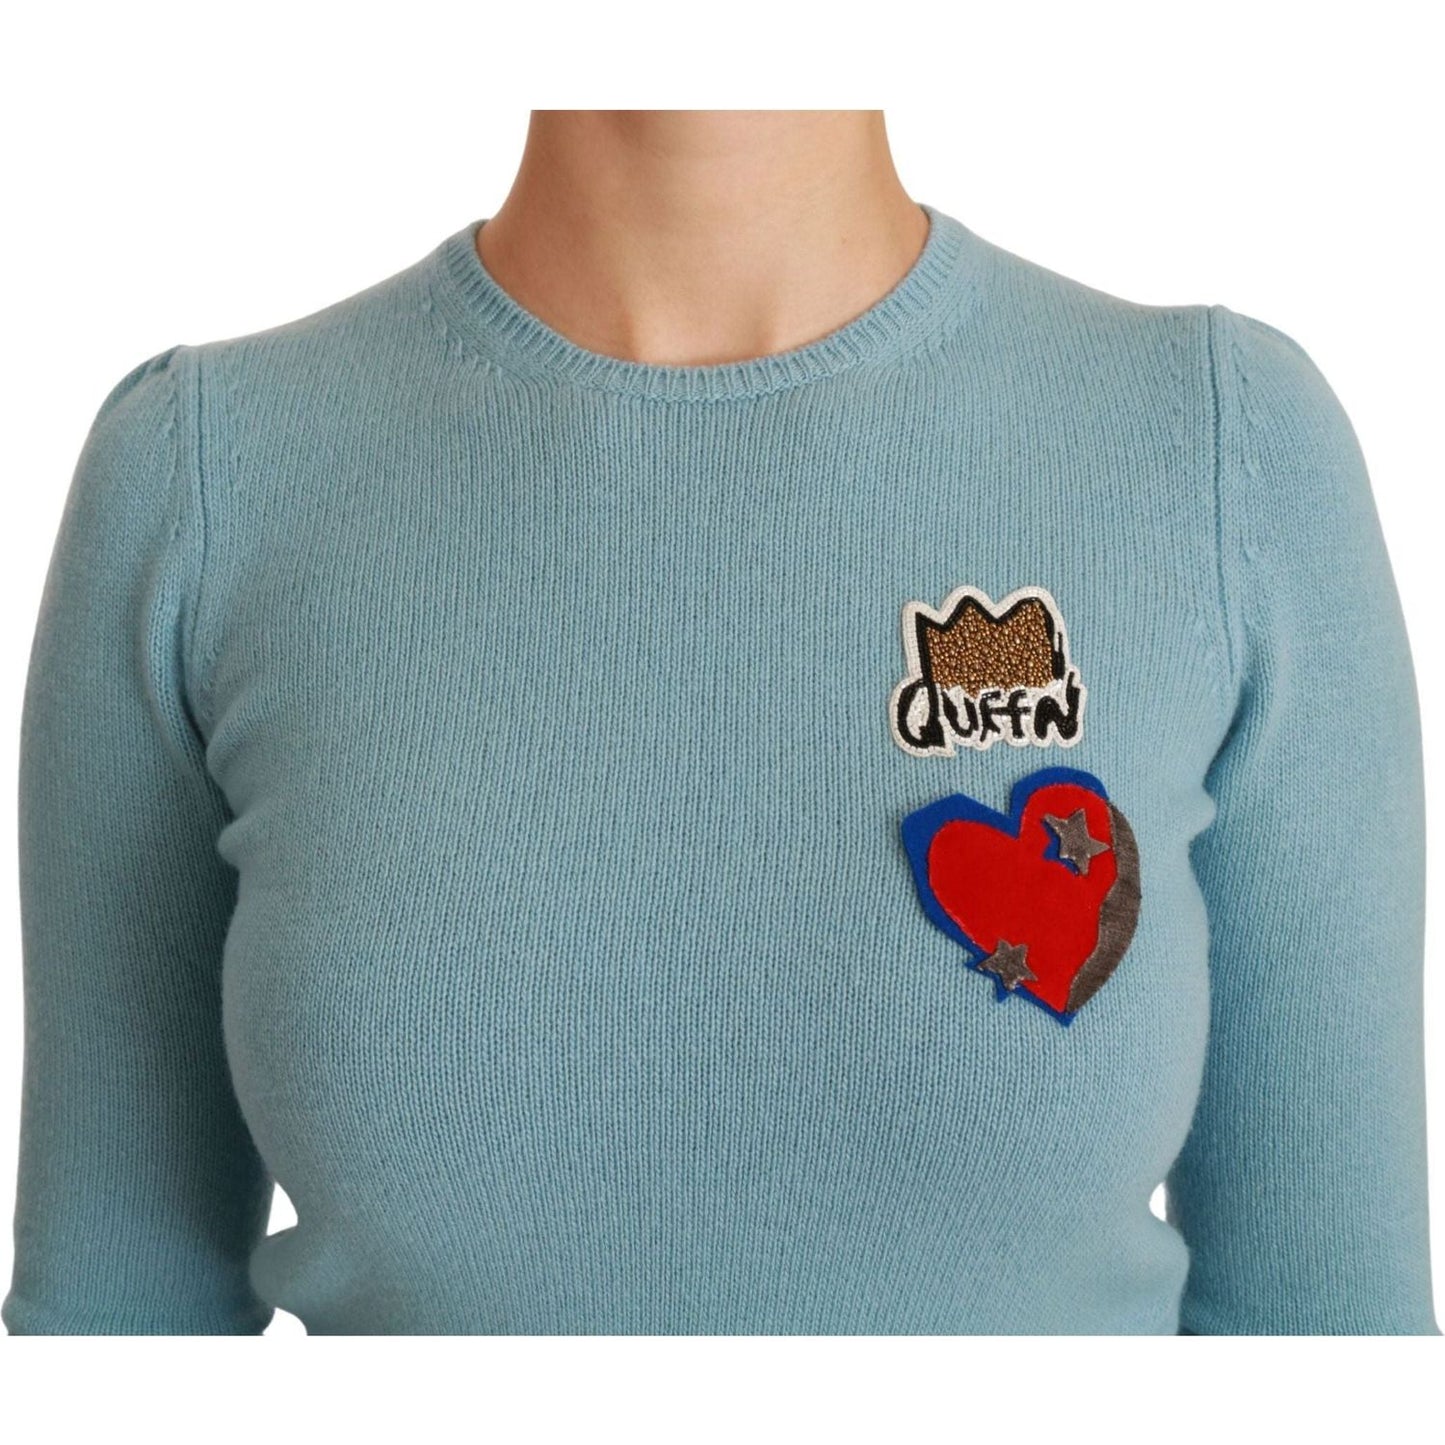 Dolce & Gabbana Queen Heart Beaded Wool Sweater blue-wool-queen-heart-pullover-sweater WOMAN TOPS AND SHIRTS IMG_7180-scaled-c5cba6ce-197.jpg